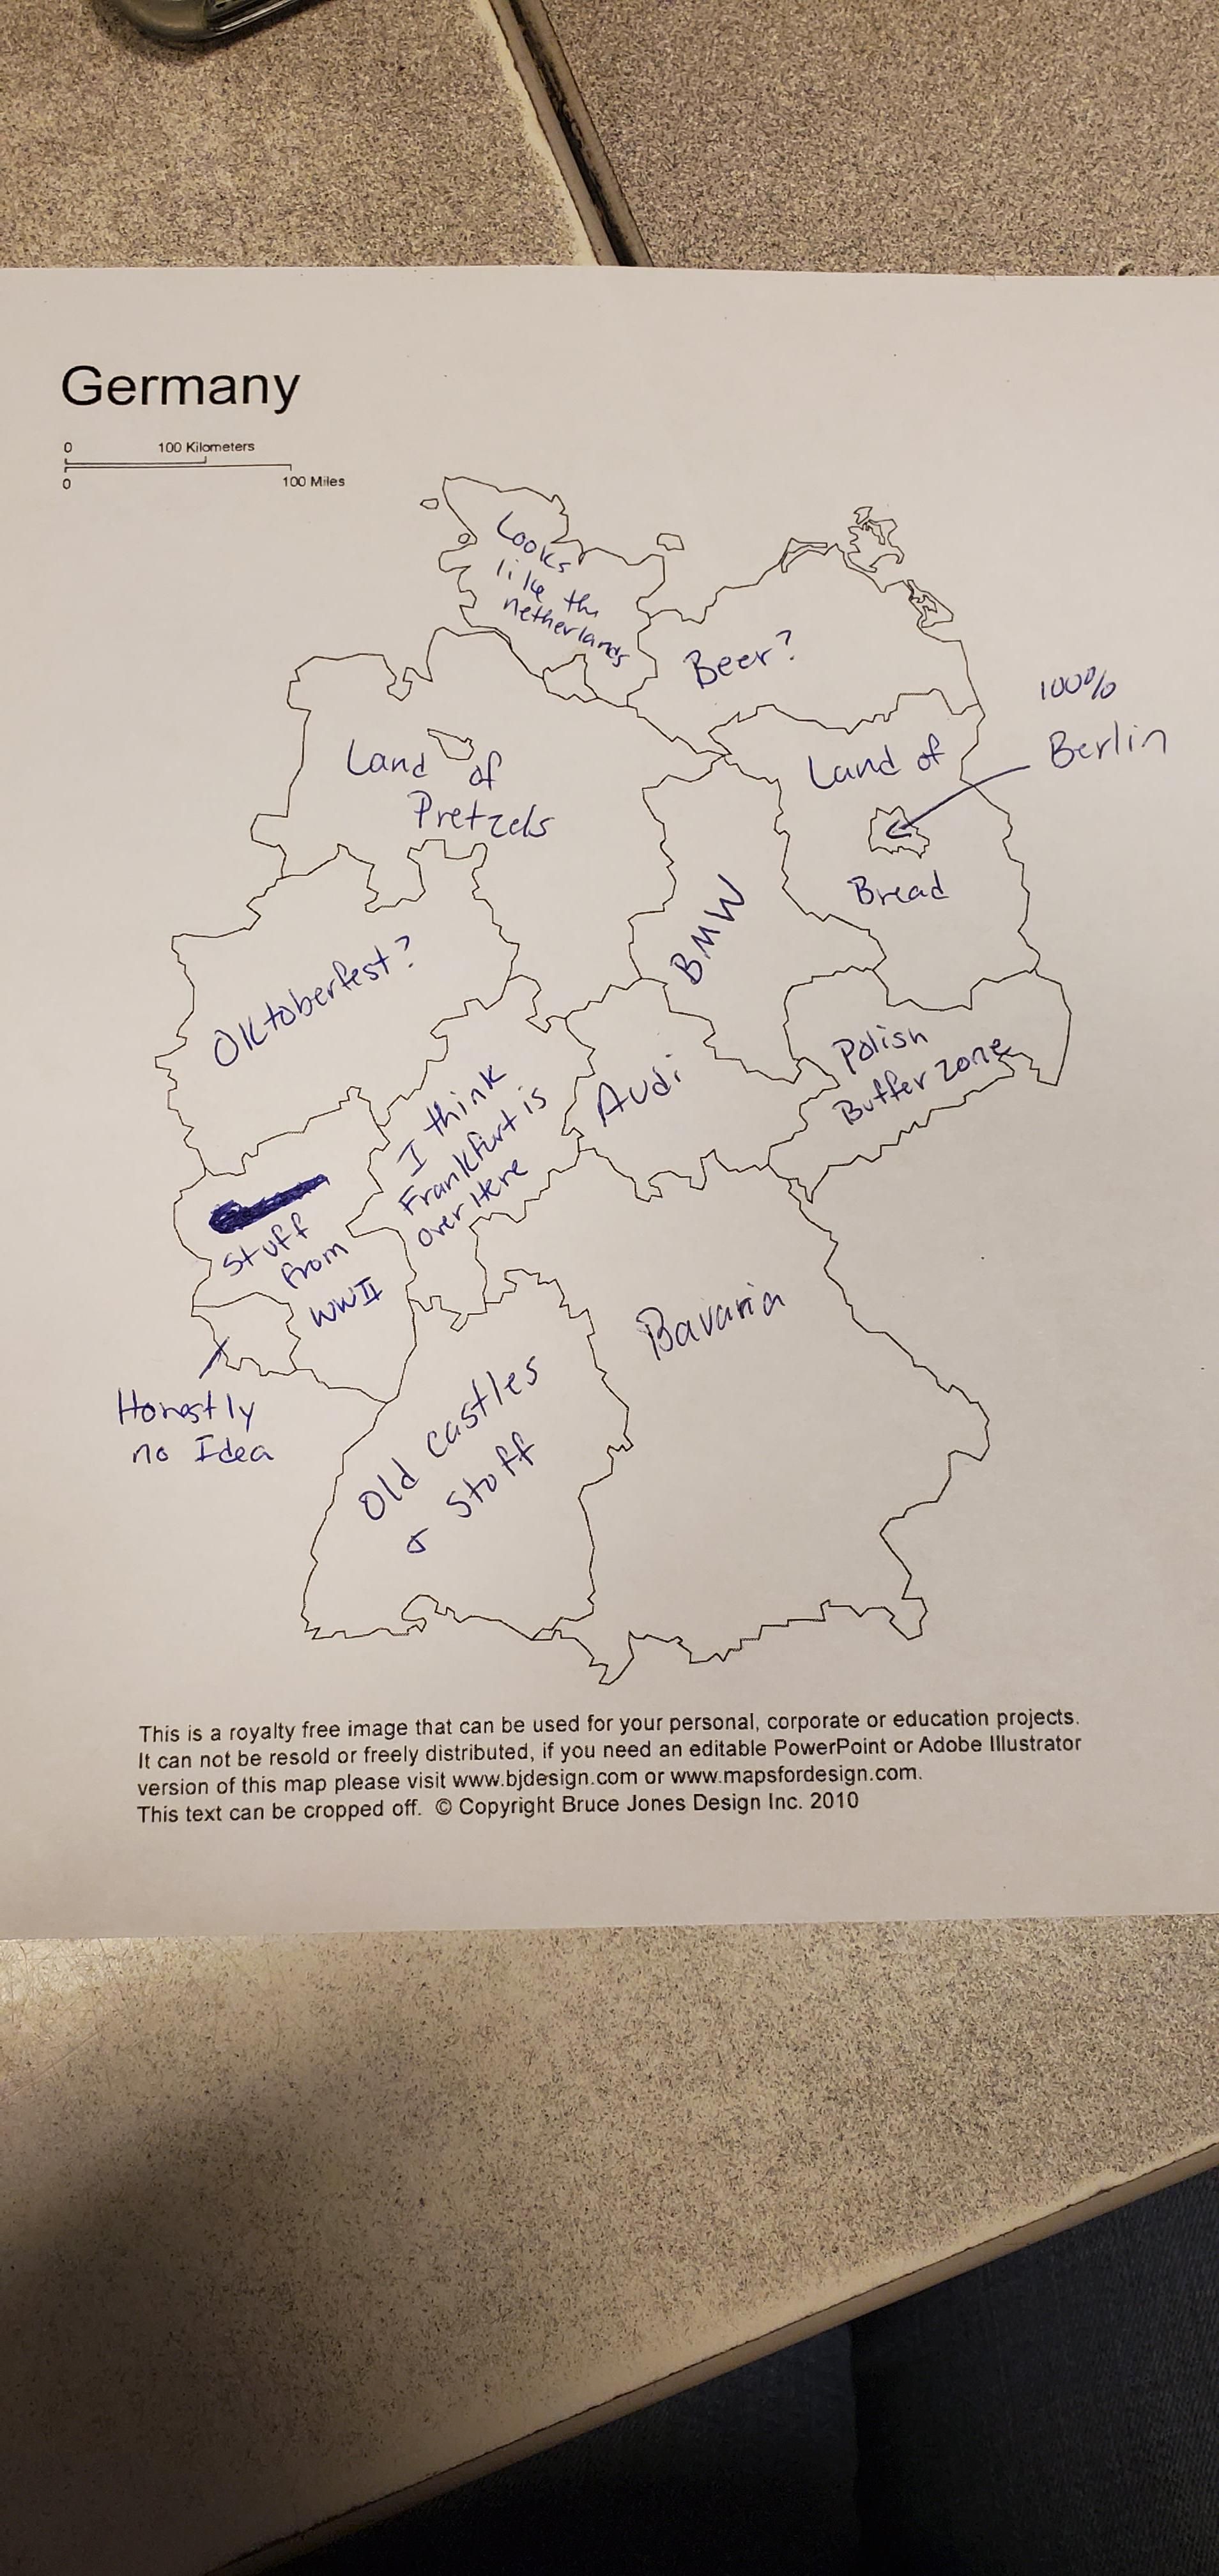 To the guy who tried to name all 50 states I tried to name germany.